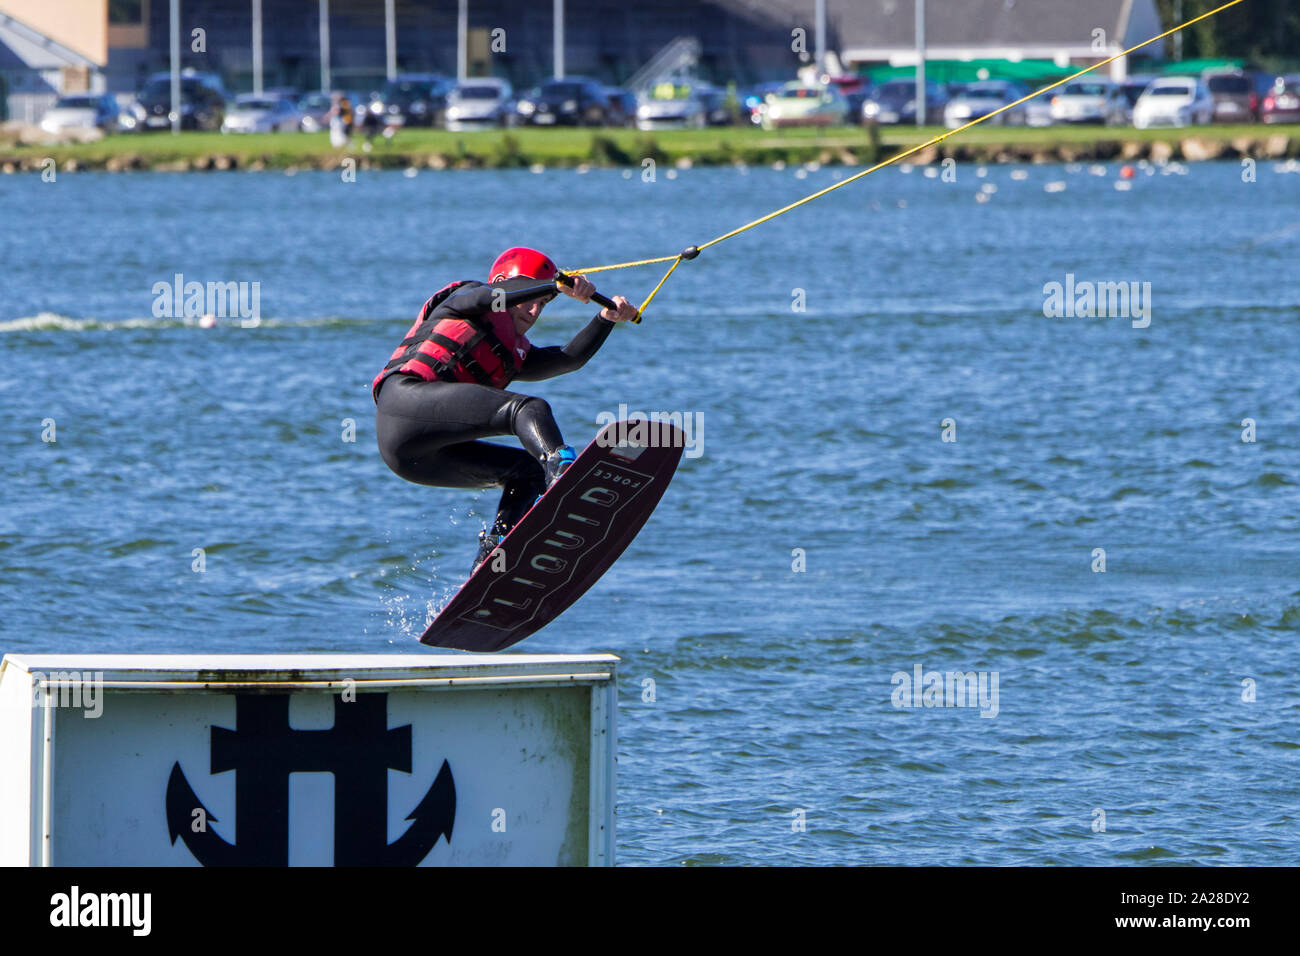 Wakeboarder / rider towed by electrically-driven cable jumping over ramp at cable ski course / wakeboard park Stock Photo